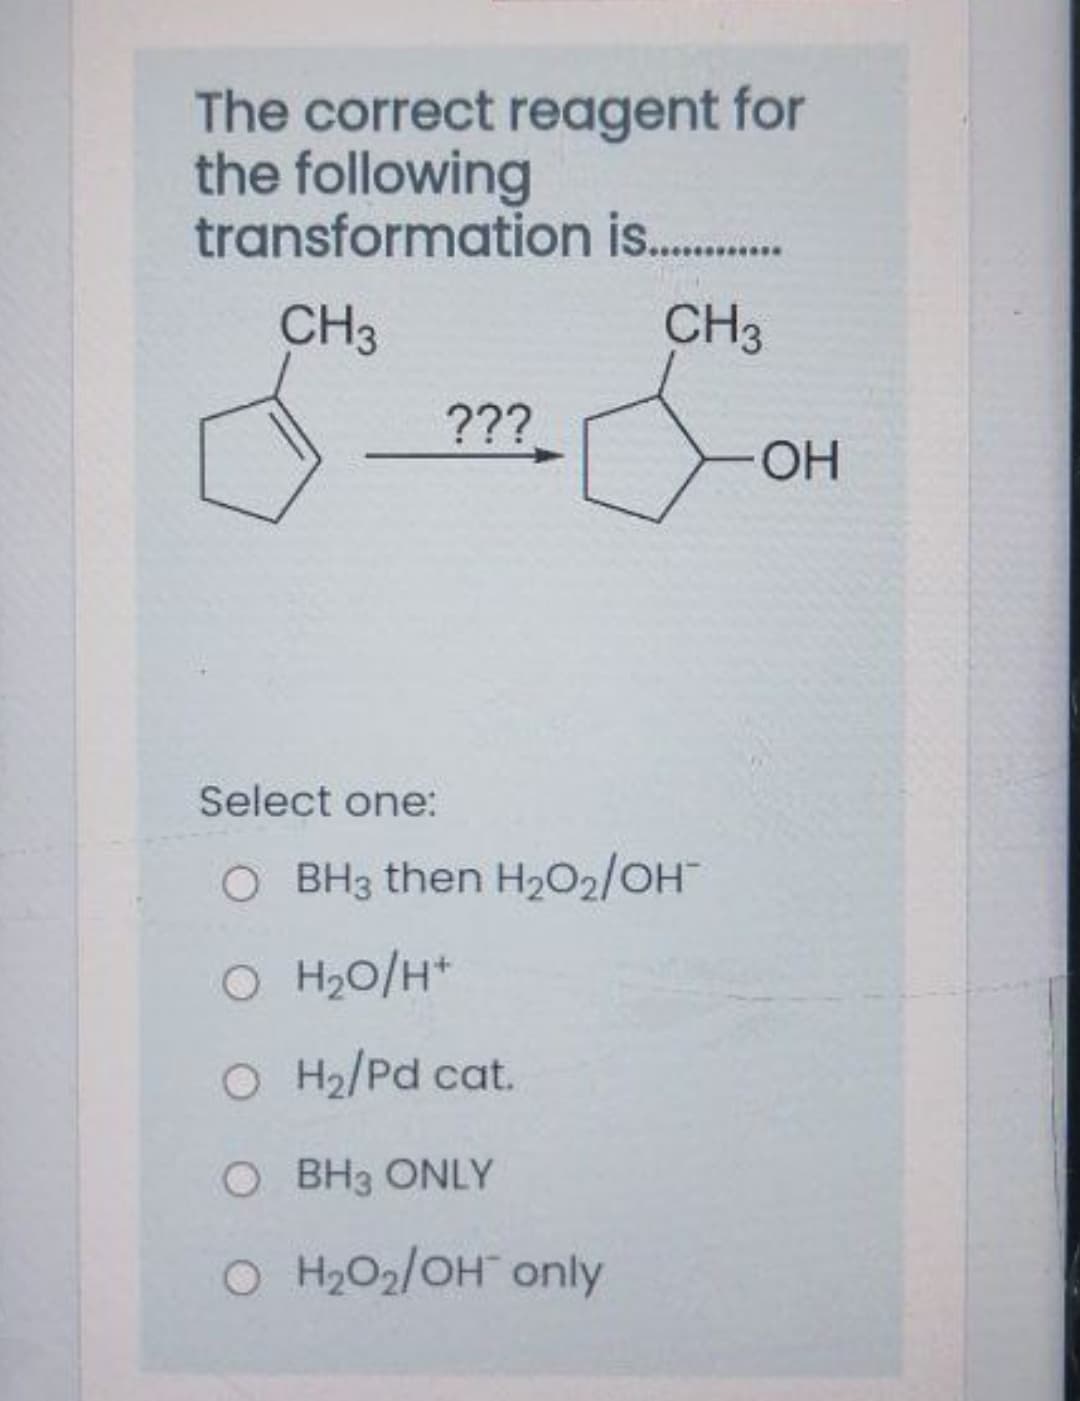 The correct reagent for
the following
transformation is .
CH3
CH3
???
OH
Select one:
O BH3 then H2O2/OH
O H20/H*
O H2/Pd cat.
O BH3 ONLY
O H2O2/OH only
